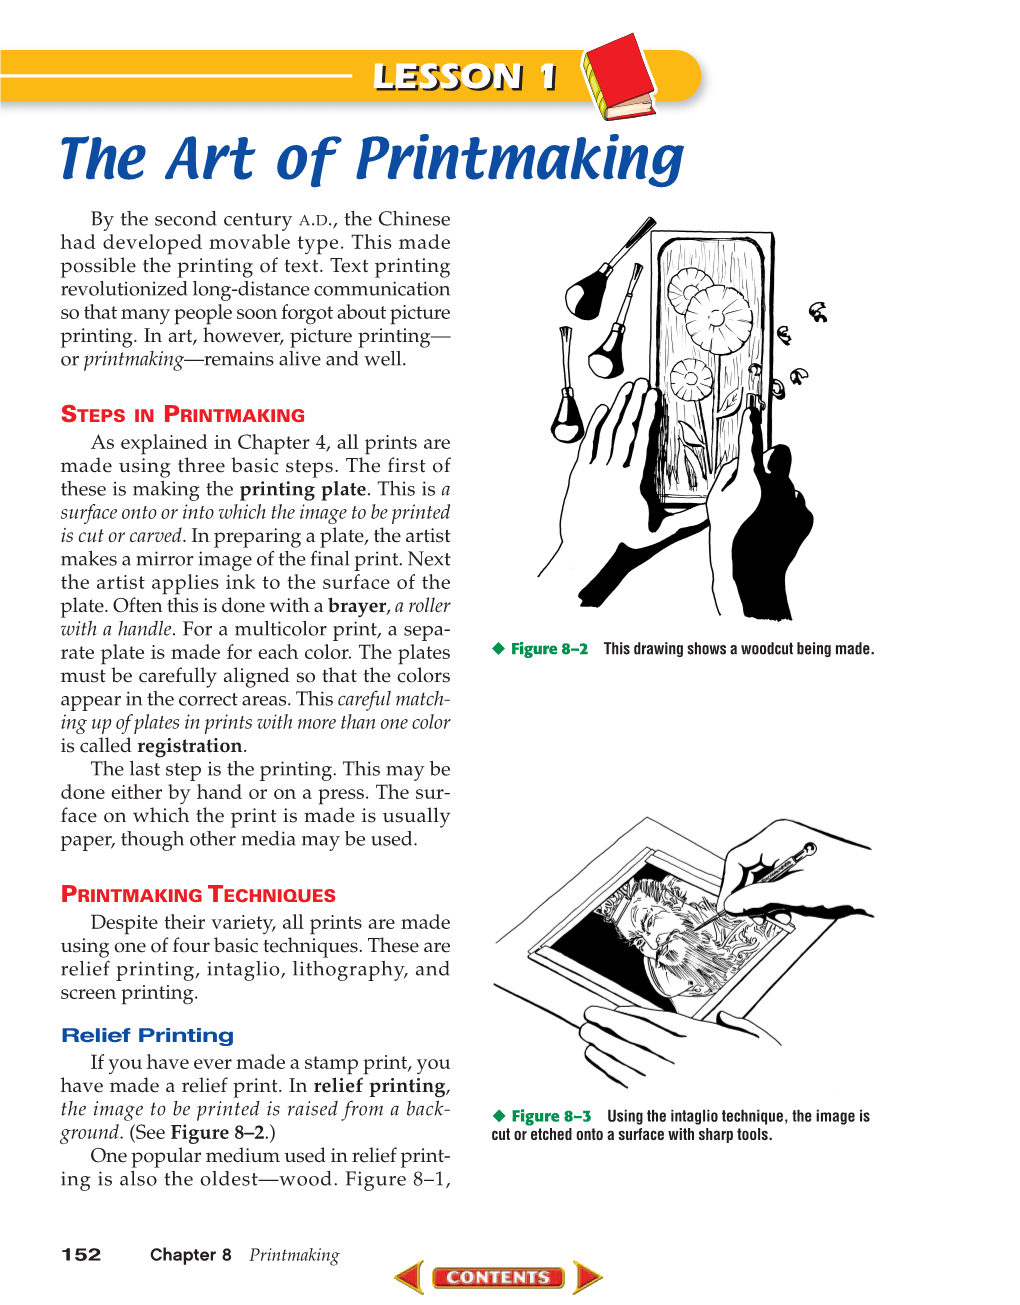 Chapter 8 Lesson 1: the Art of Printmaking